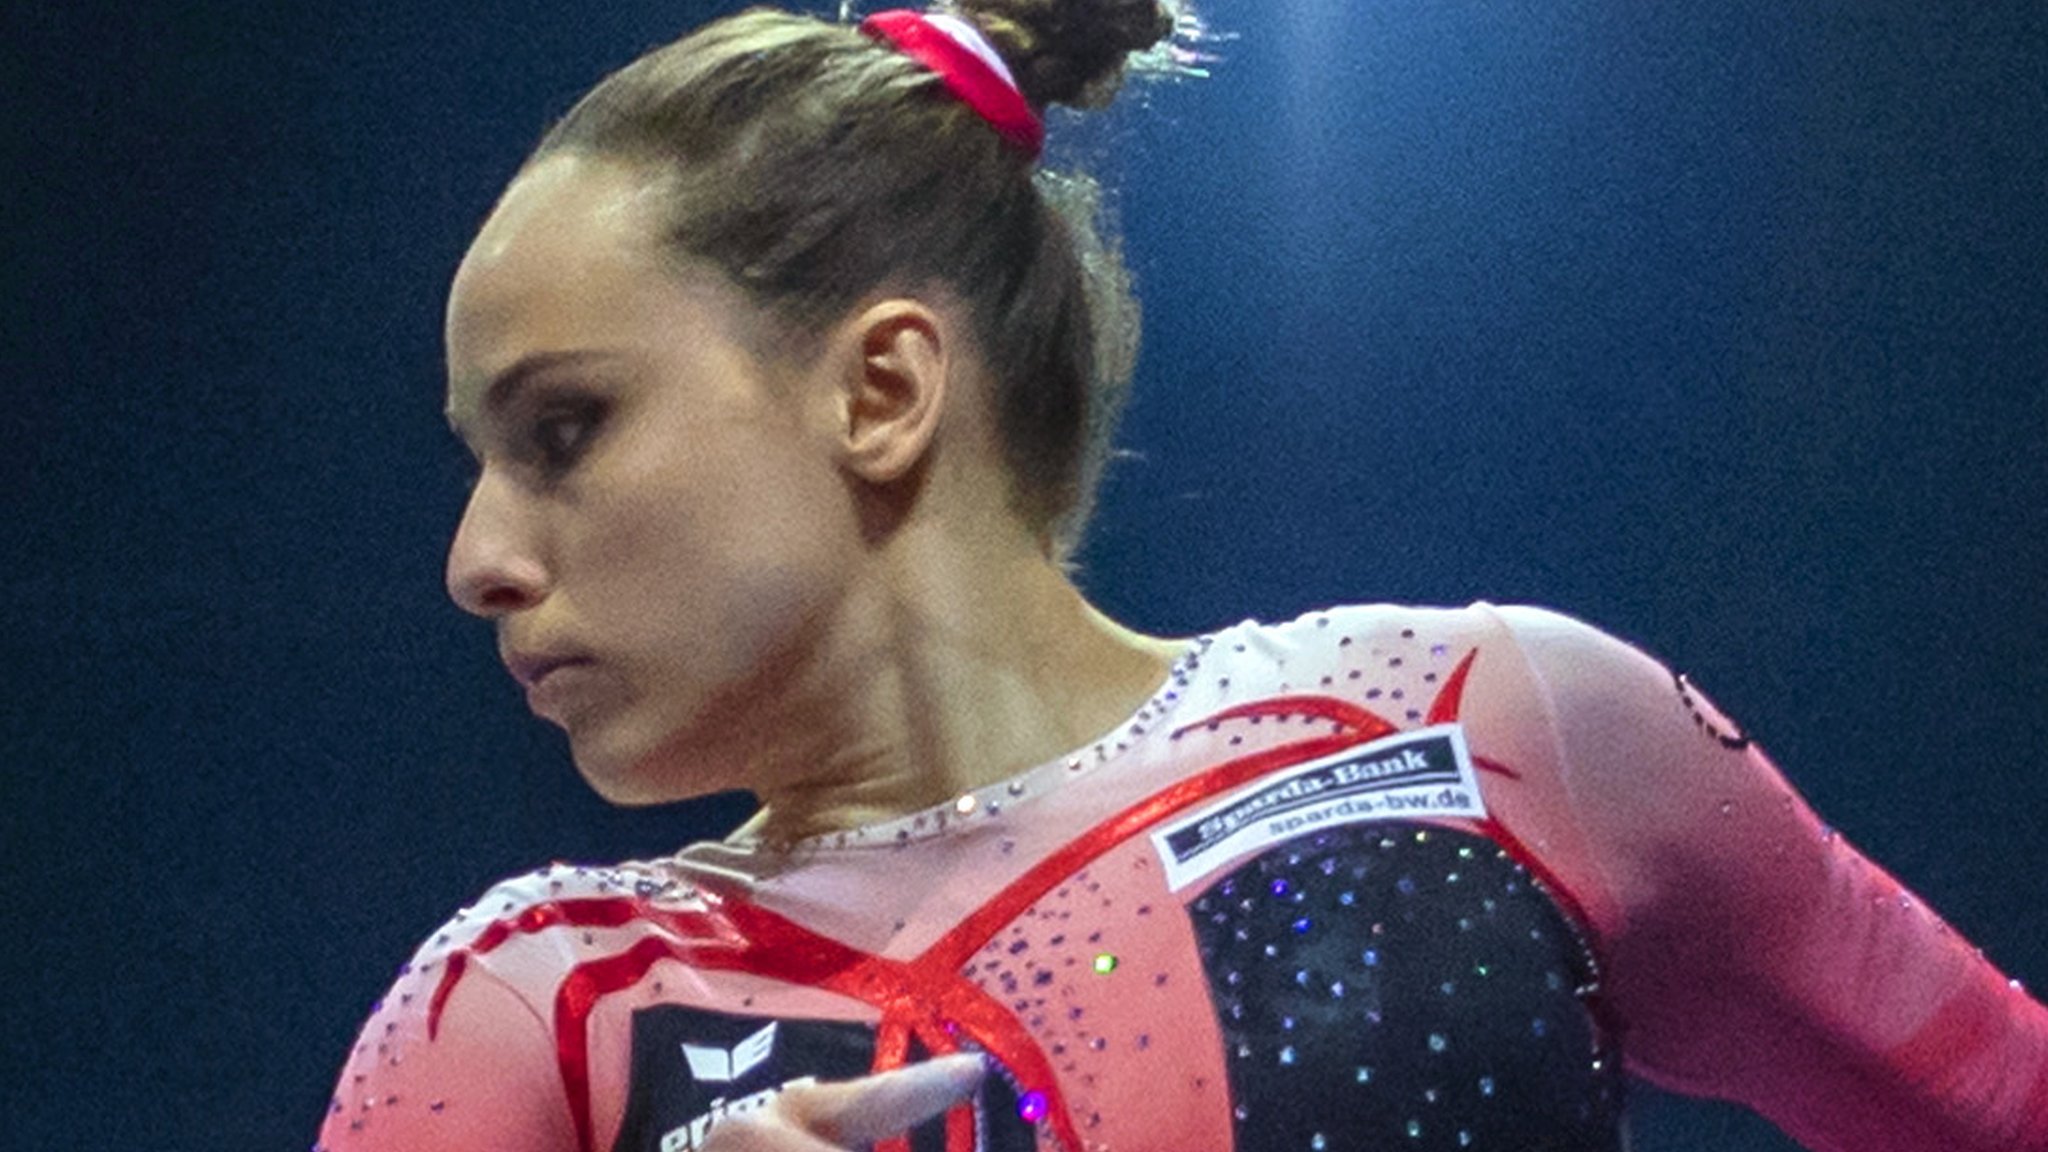 Body suits could help keep young gymnasts in the sport - Voss